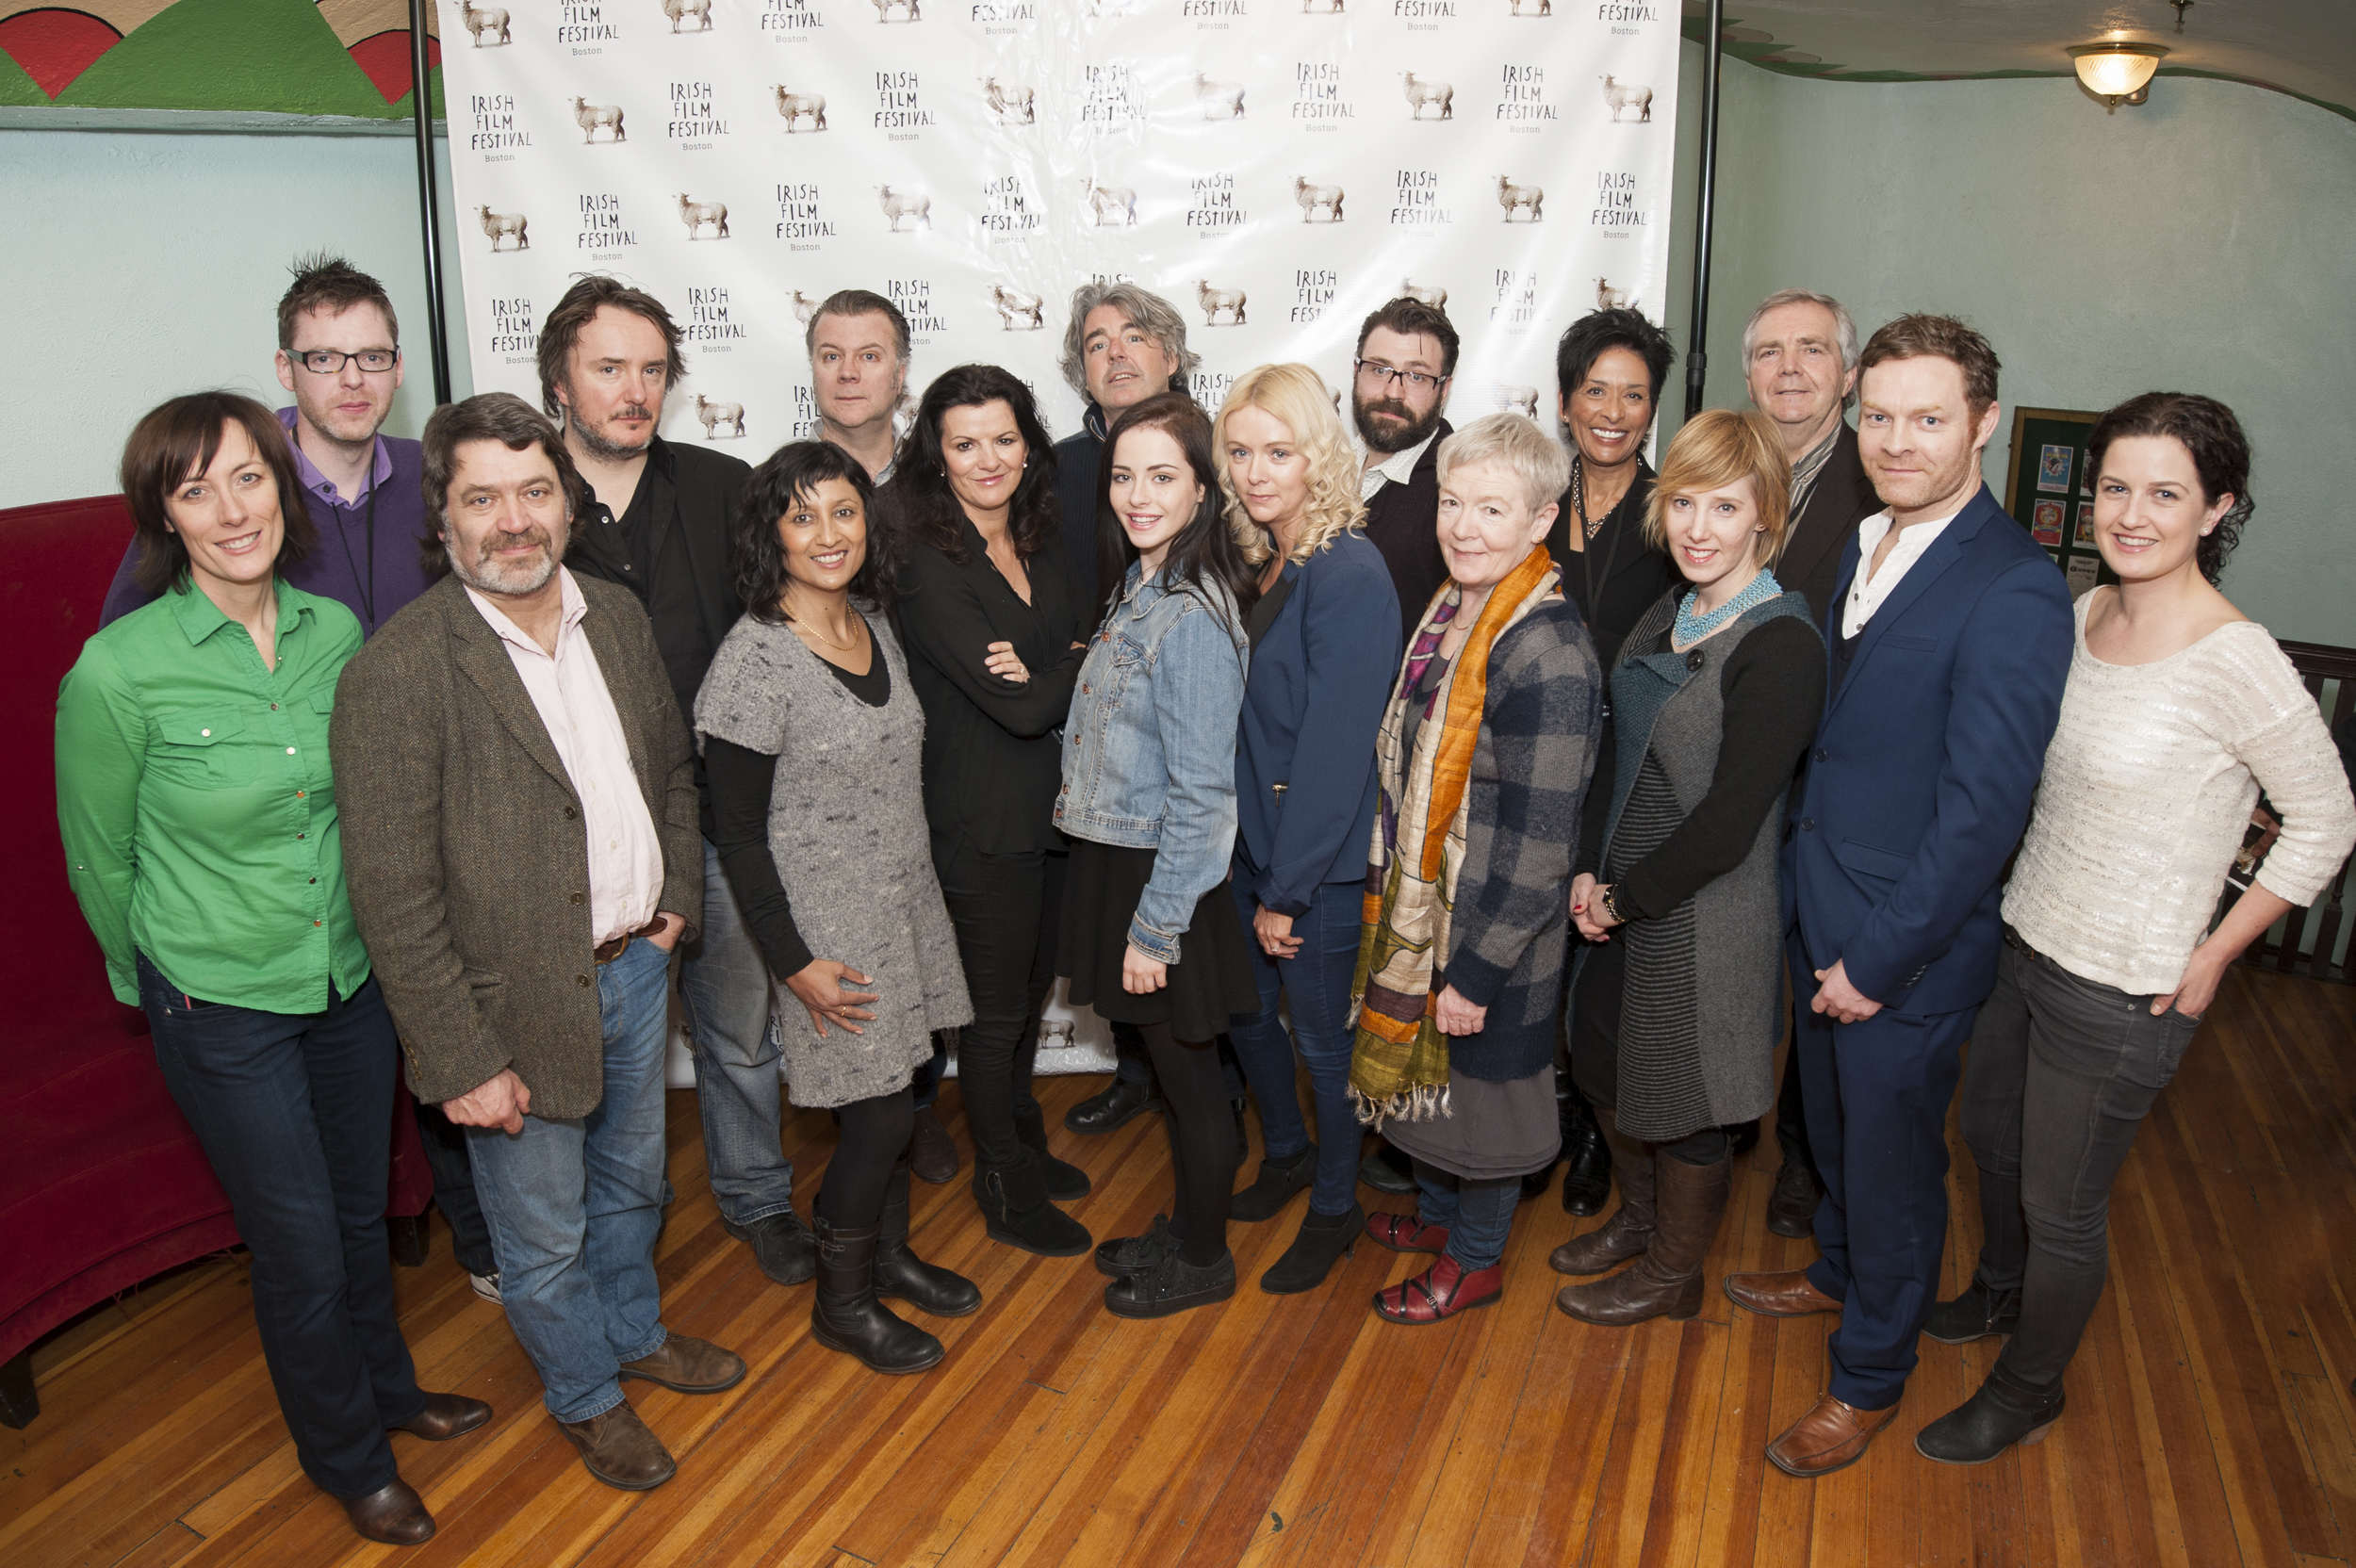    Thanks to all of the film makers, directors, producers and actors who made the 2014 film festival a huge success!   